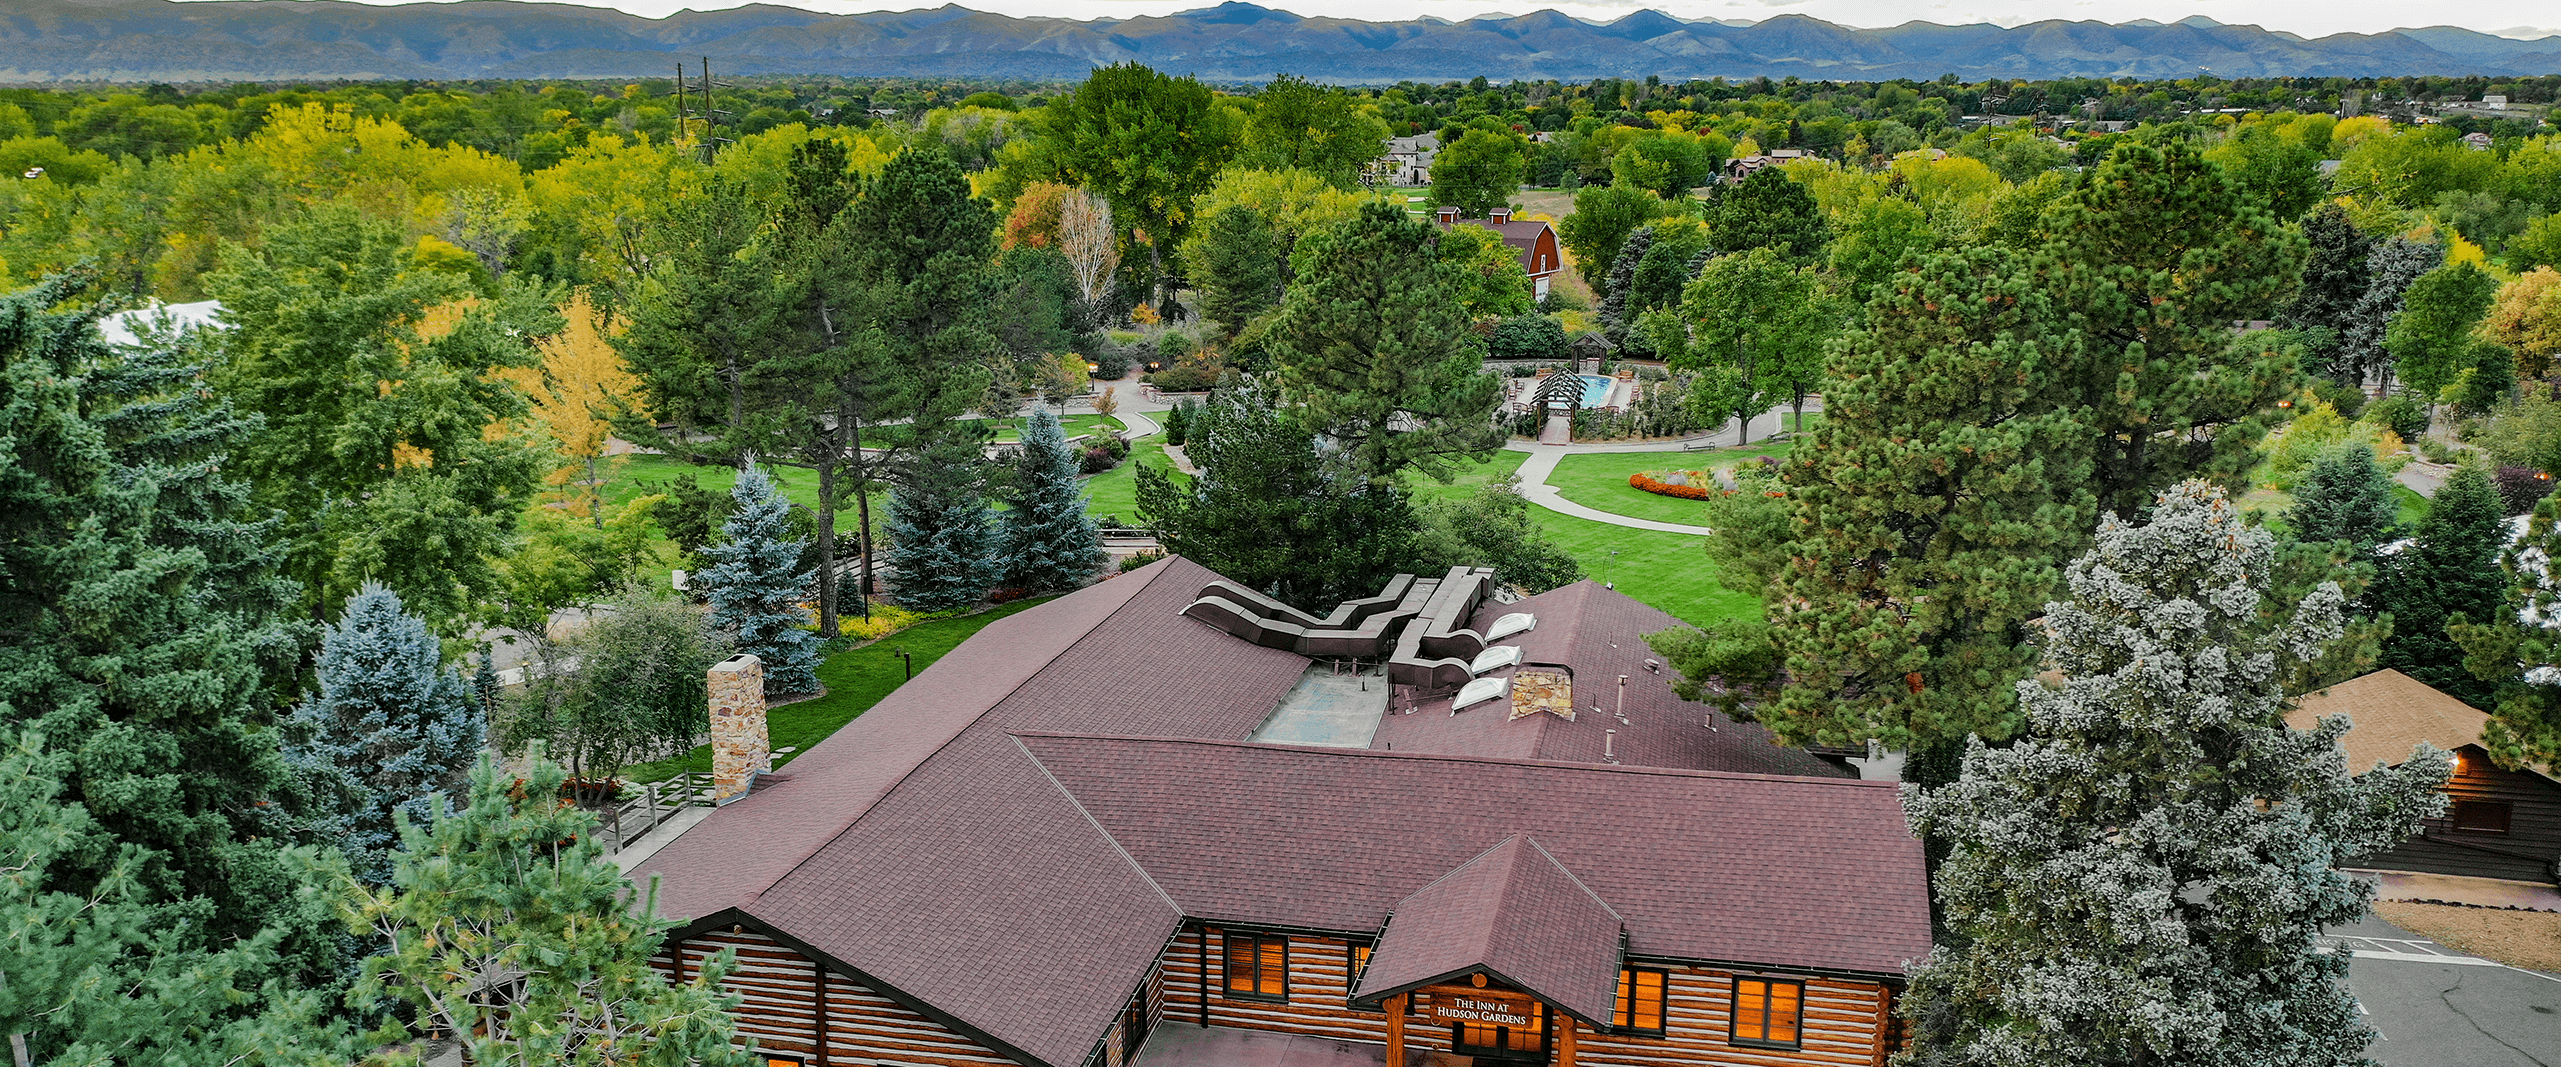 a log cabin venue surrounded by mountains for corporate events in the Denver area